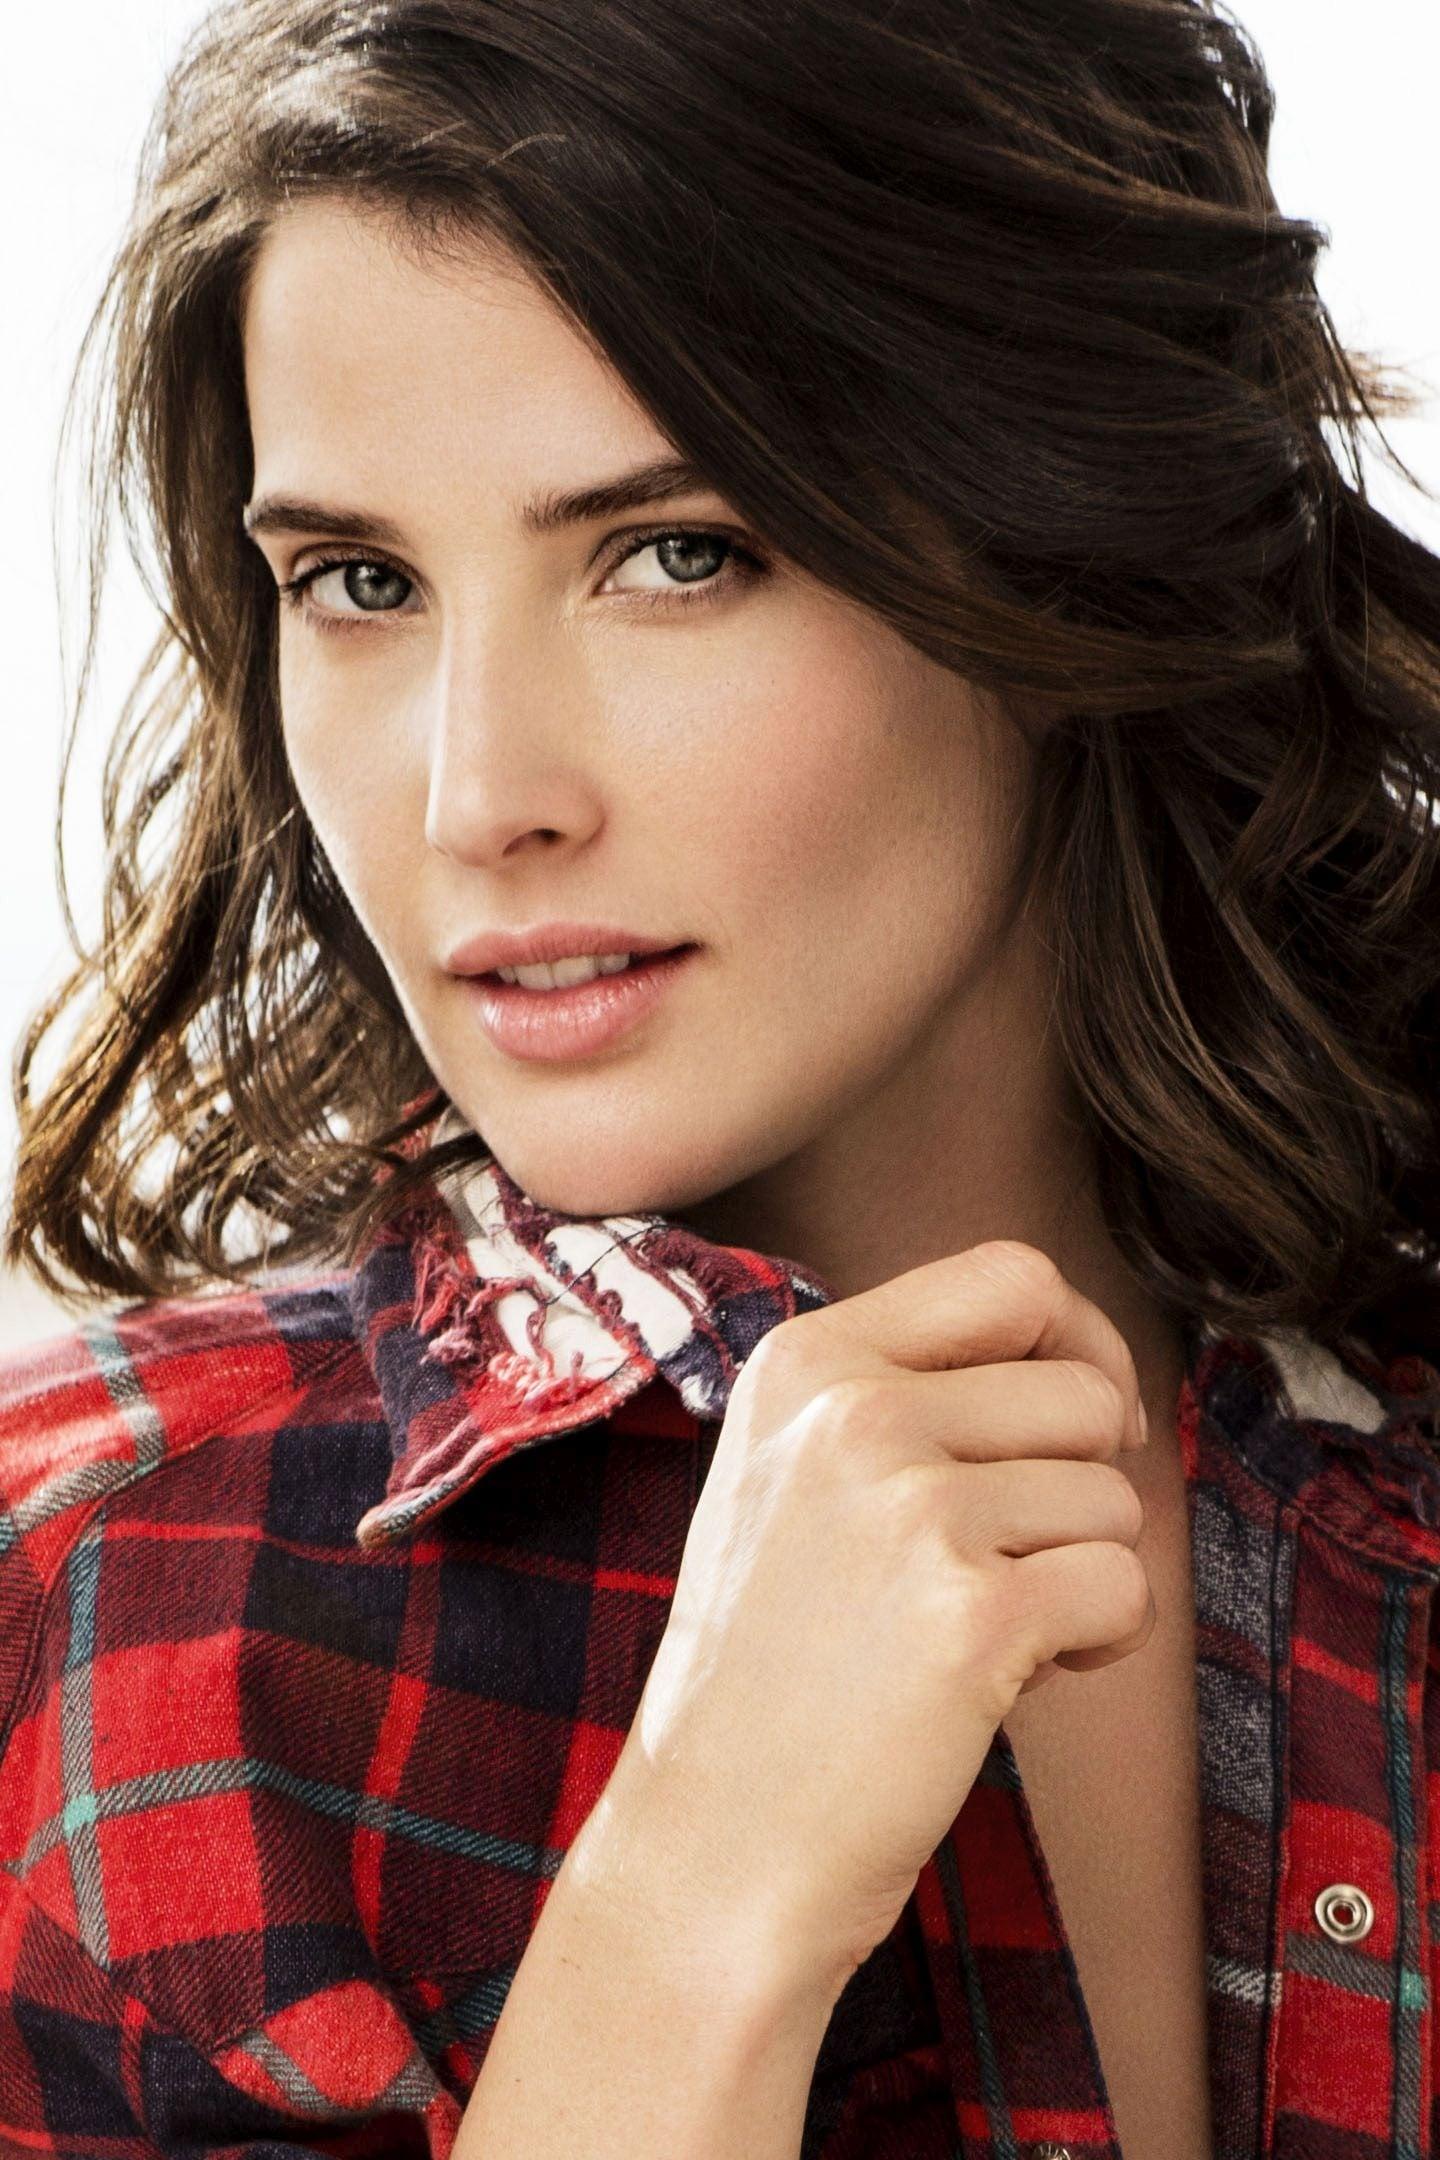 70+ Hot Pictures Of Cobie Smulders – Maria Hill Actress In Marvel Movies 5